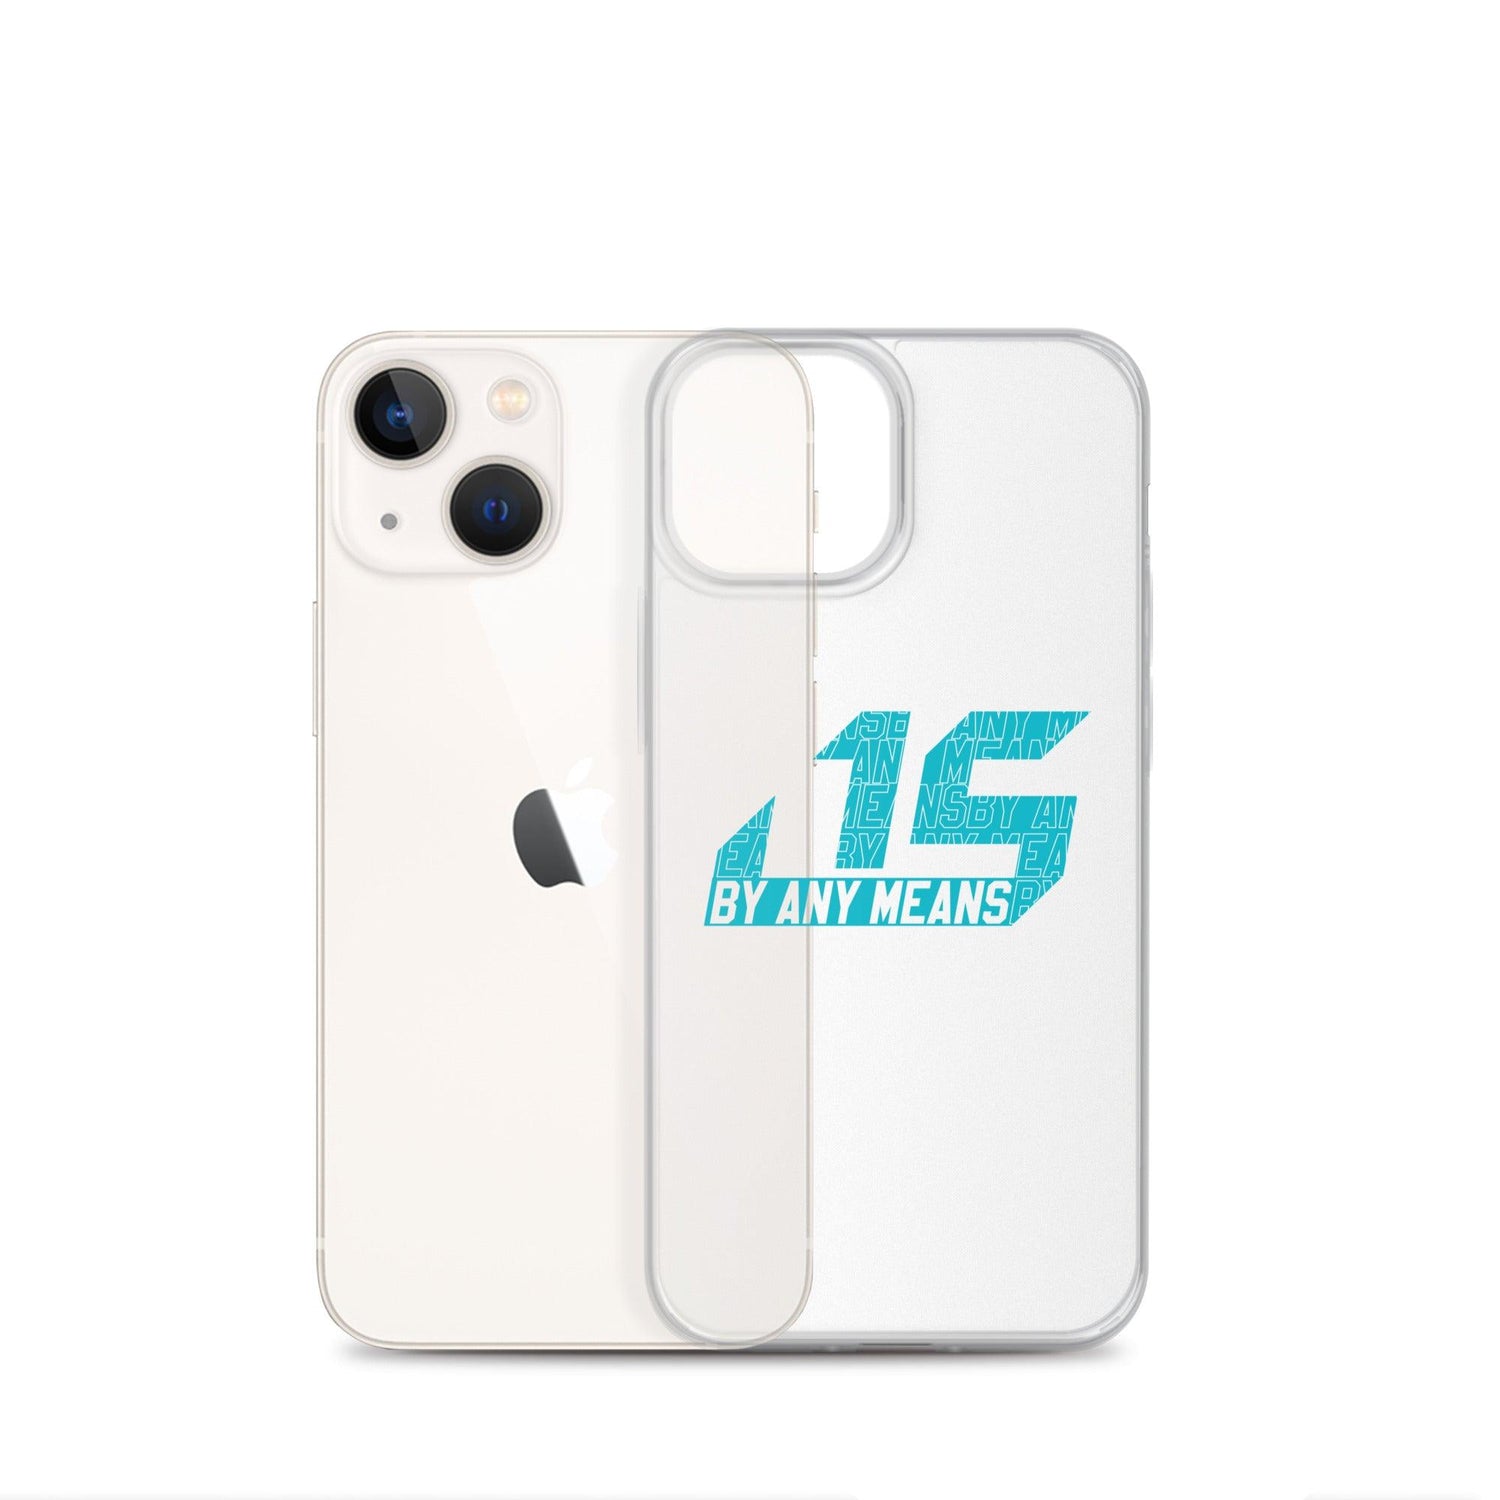 Jai Smith "By Any Means" ciPhone Case - Fan Arch